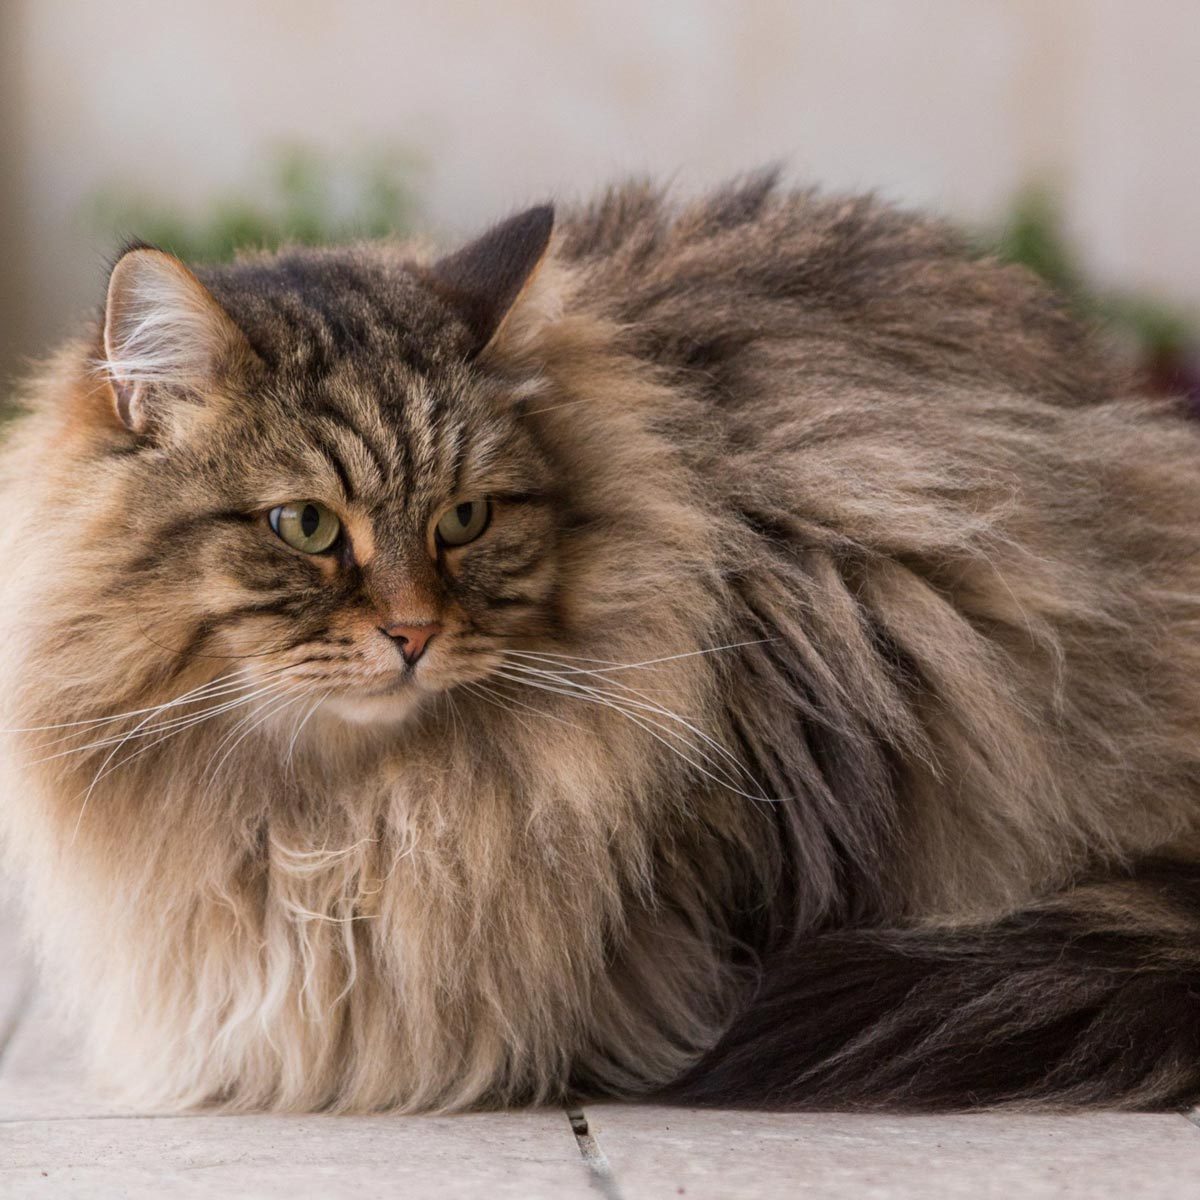 https://www.familyhandyman.com/wp-content/uploads/2020/06/Cute-long-haired-cat-of-siberian-breed-furry-hypoallergenic-pet-of-livestock-in-relax-outdoor.-Adorable-domestic-animal-scaled.jpg?fit=700%2C1024